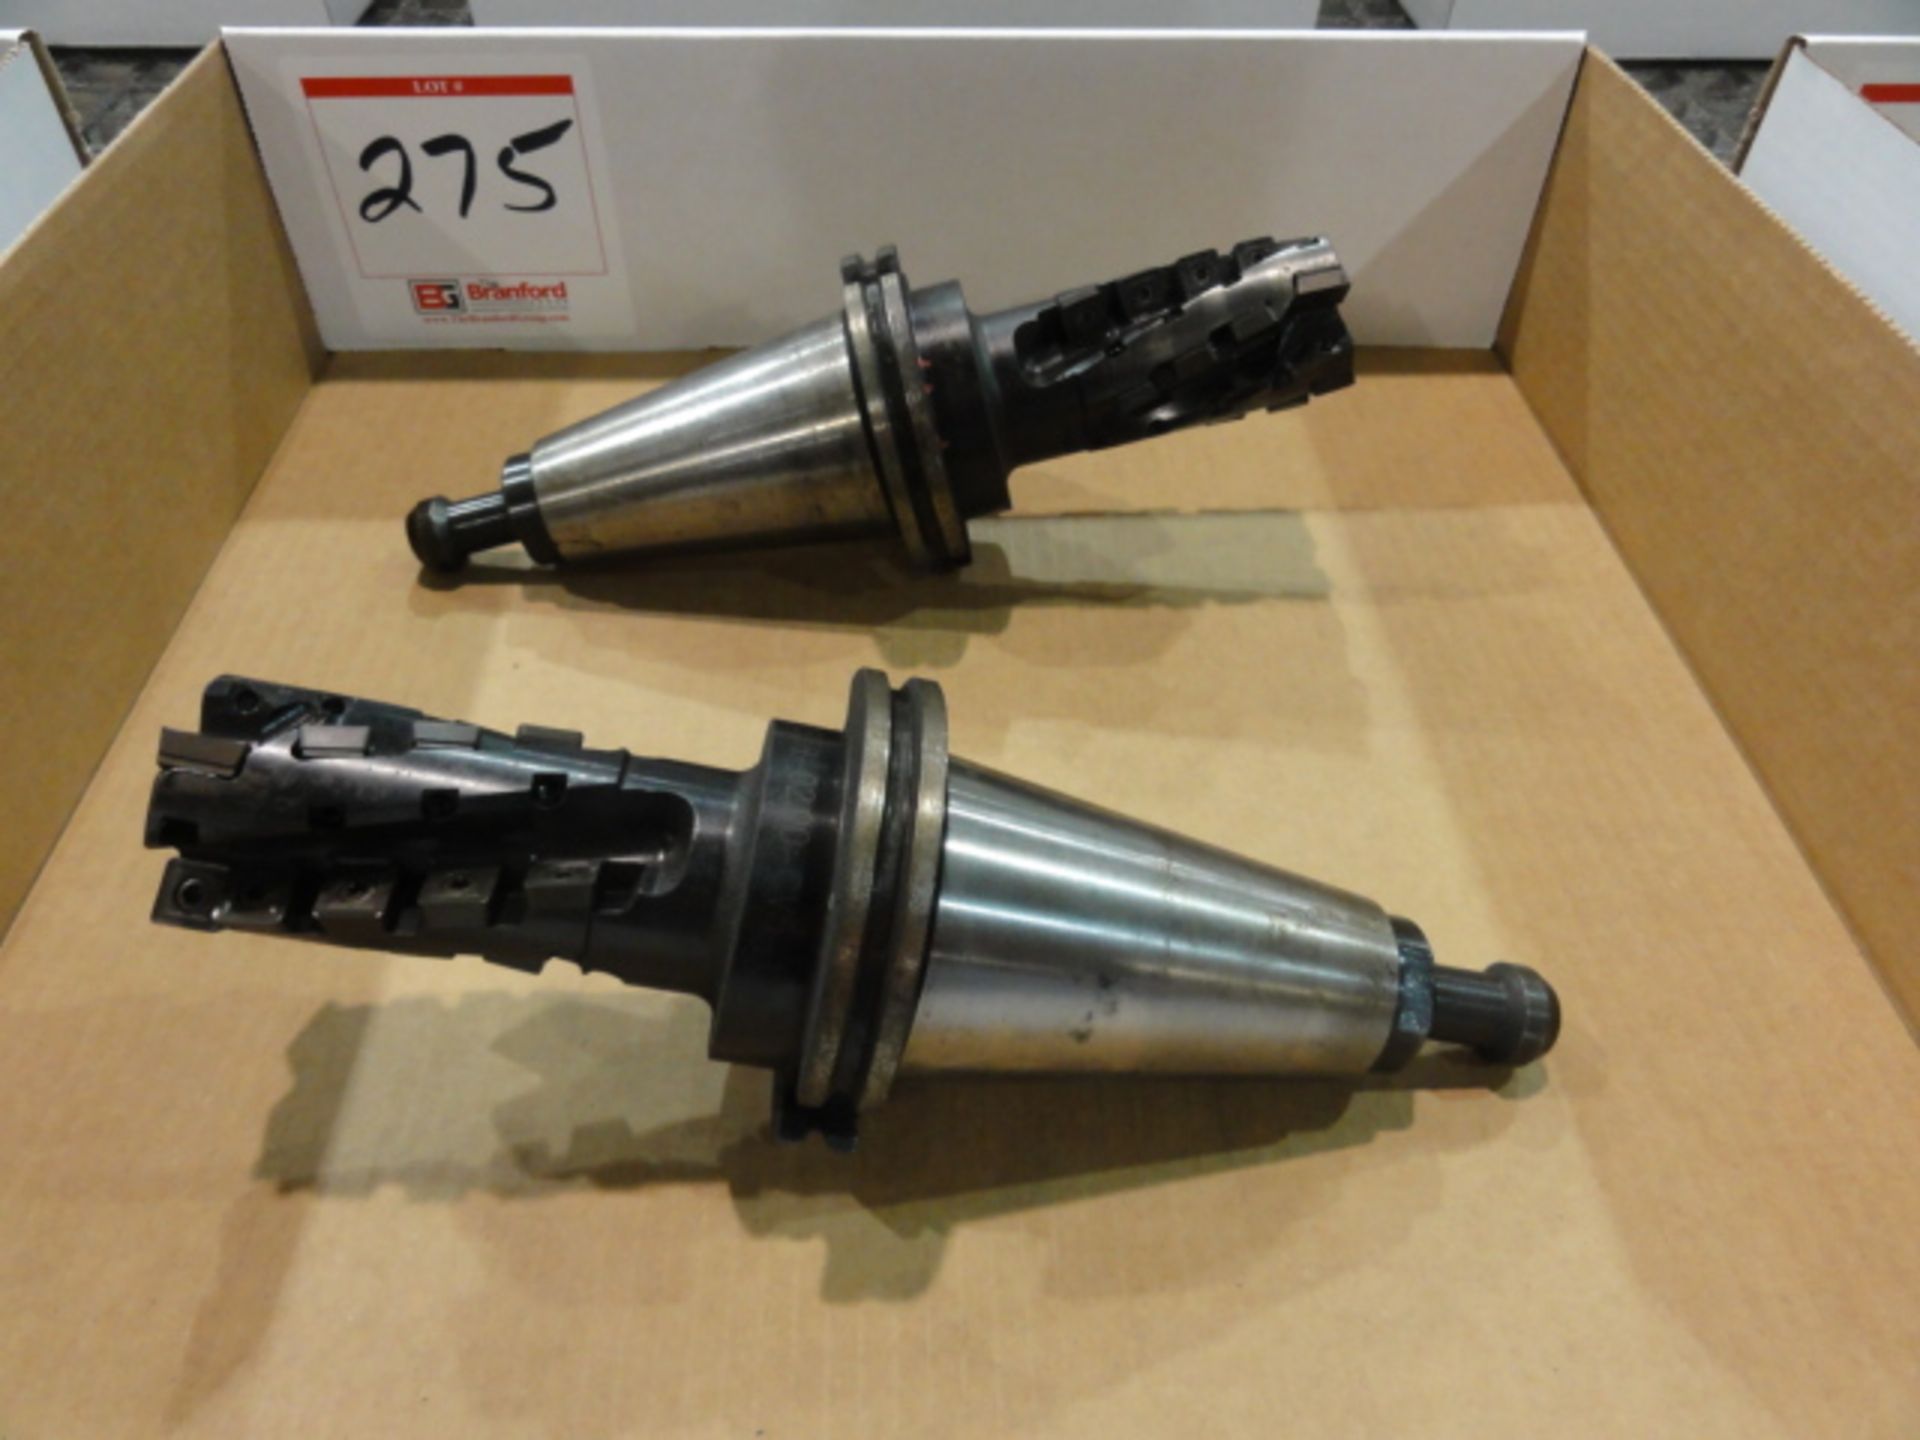 Lot of (2) CAT 50 Tool Holders w/ Carboloy 2" Model R215.59-02.00 Carbide Insert Finishing Tools - Image 2 of 2